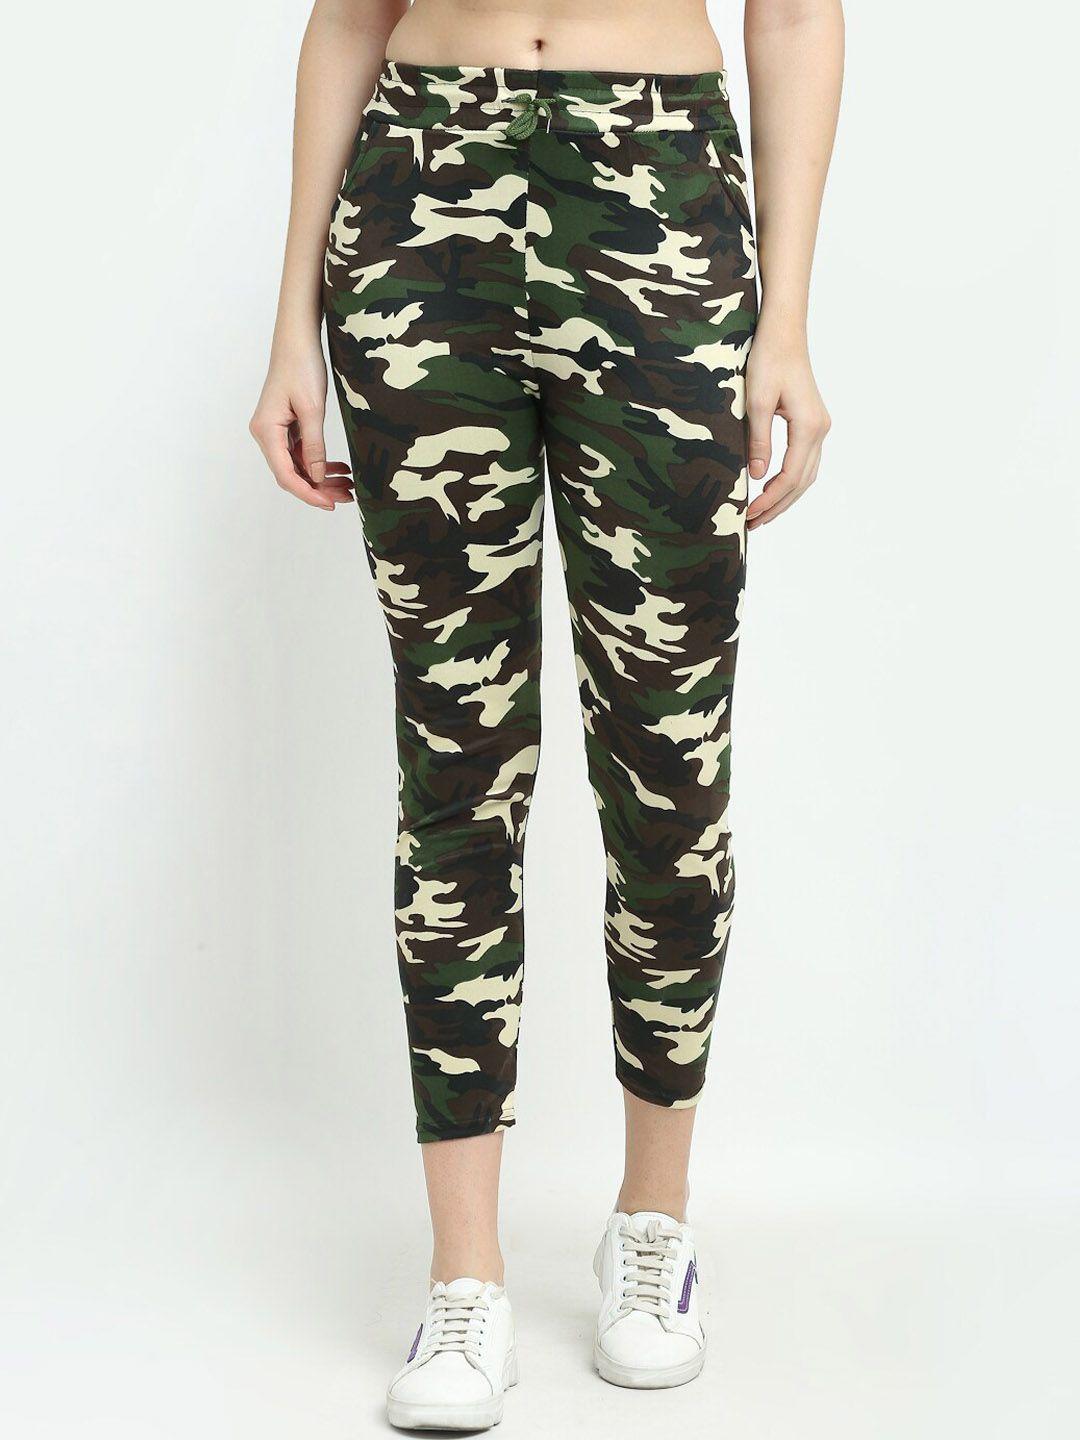 tag 7 women green camouflage printed comfort wrinkle free trousers